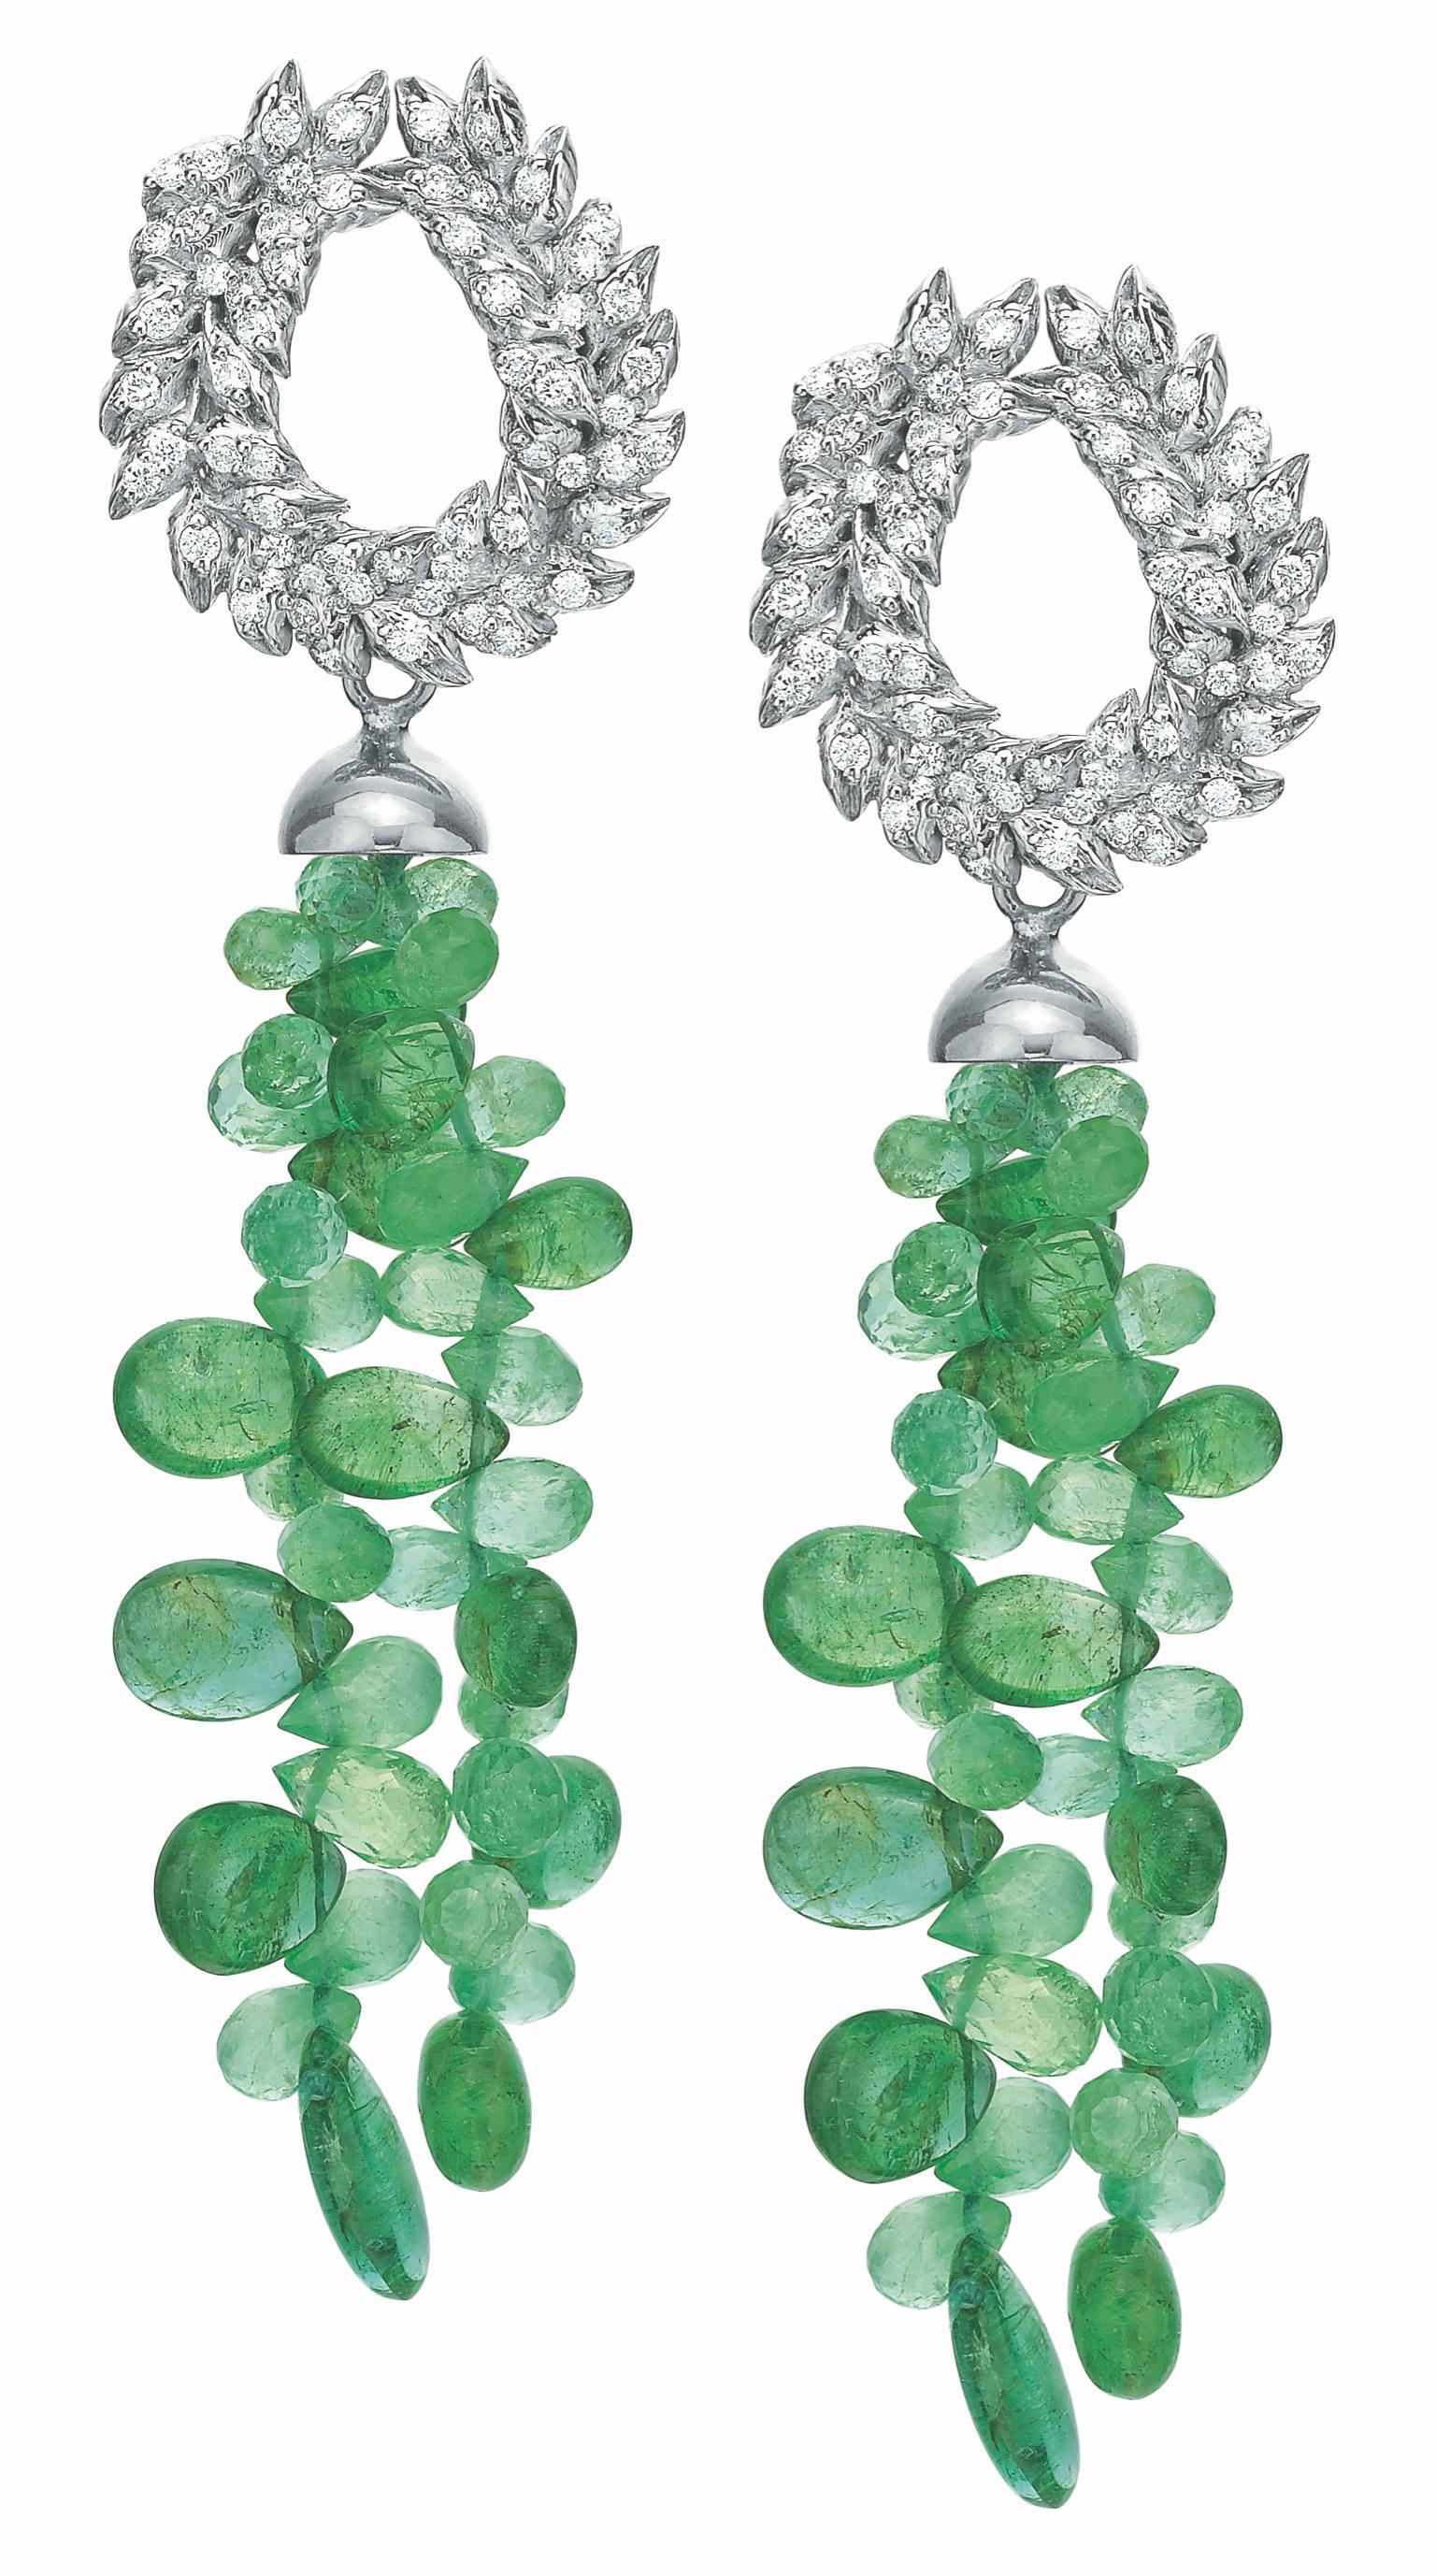 Modern Andrew Glassford Diamond Earrings with Detachable Emerald & Sapphire Briolletes